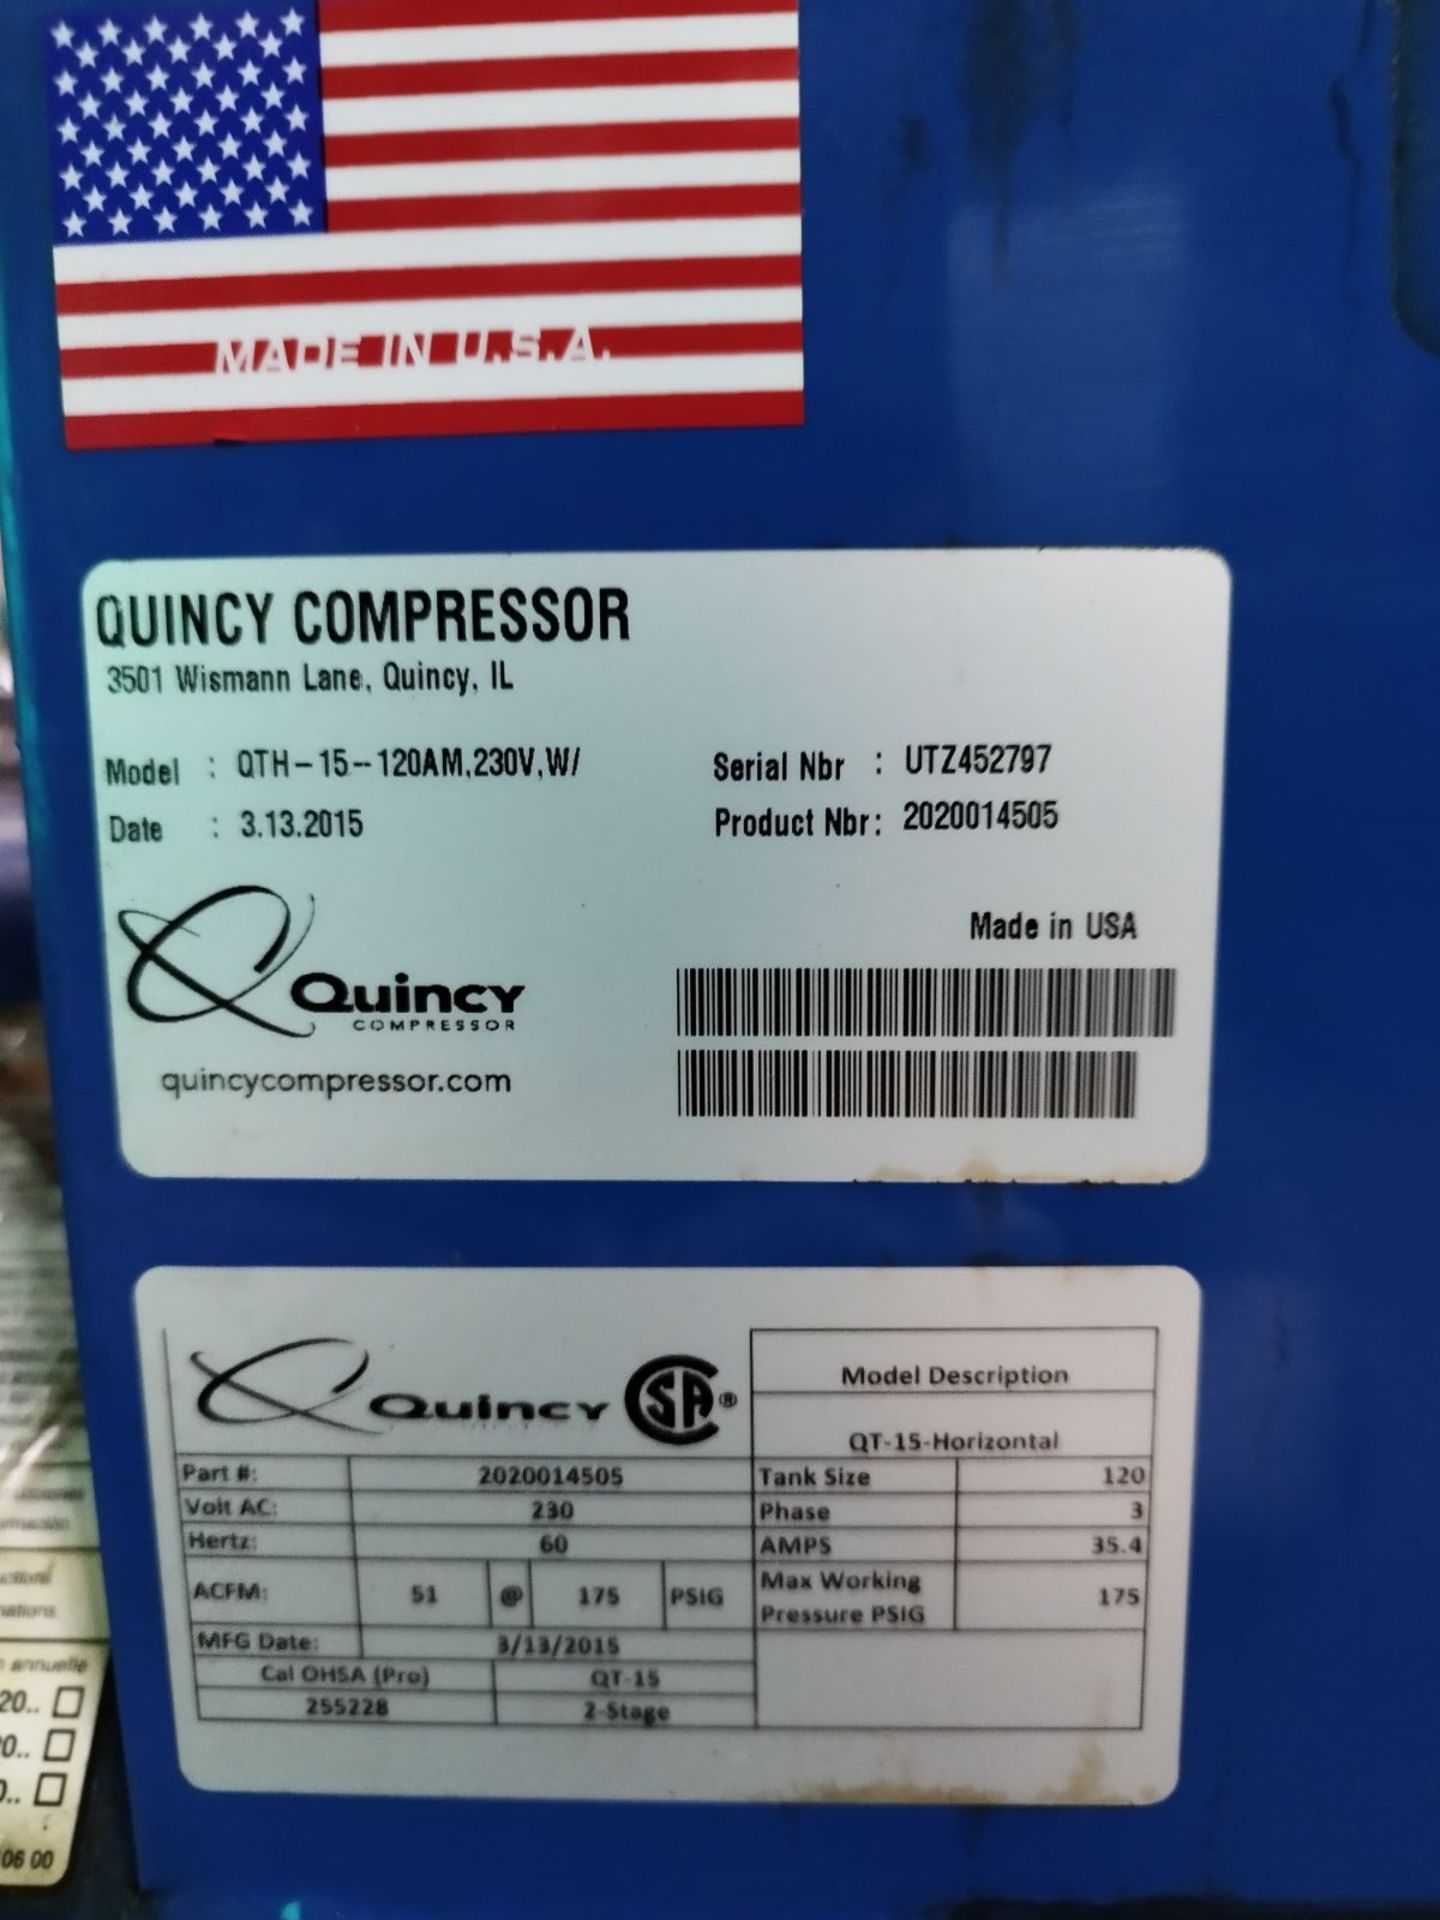 Quincy Air Compressor (SMW2) - Columbia, PA - Image 3 of 3